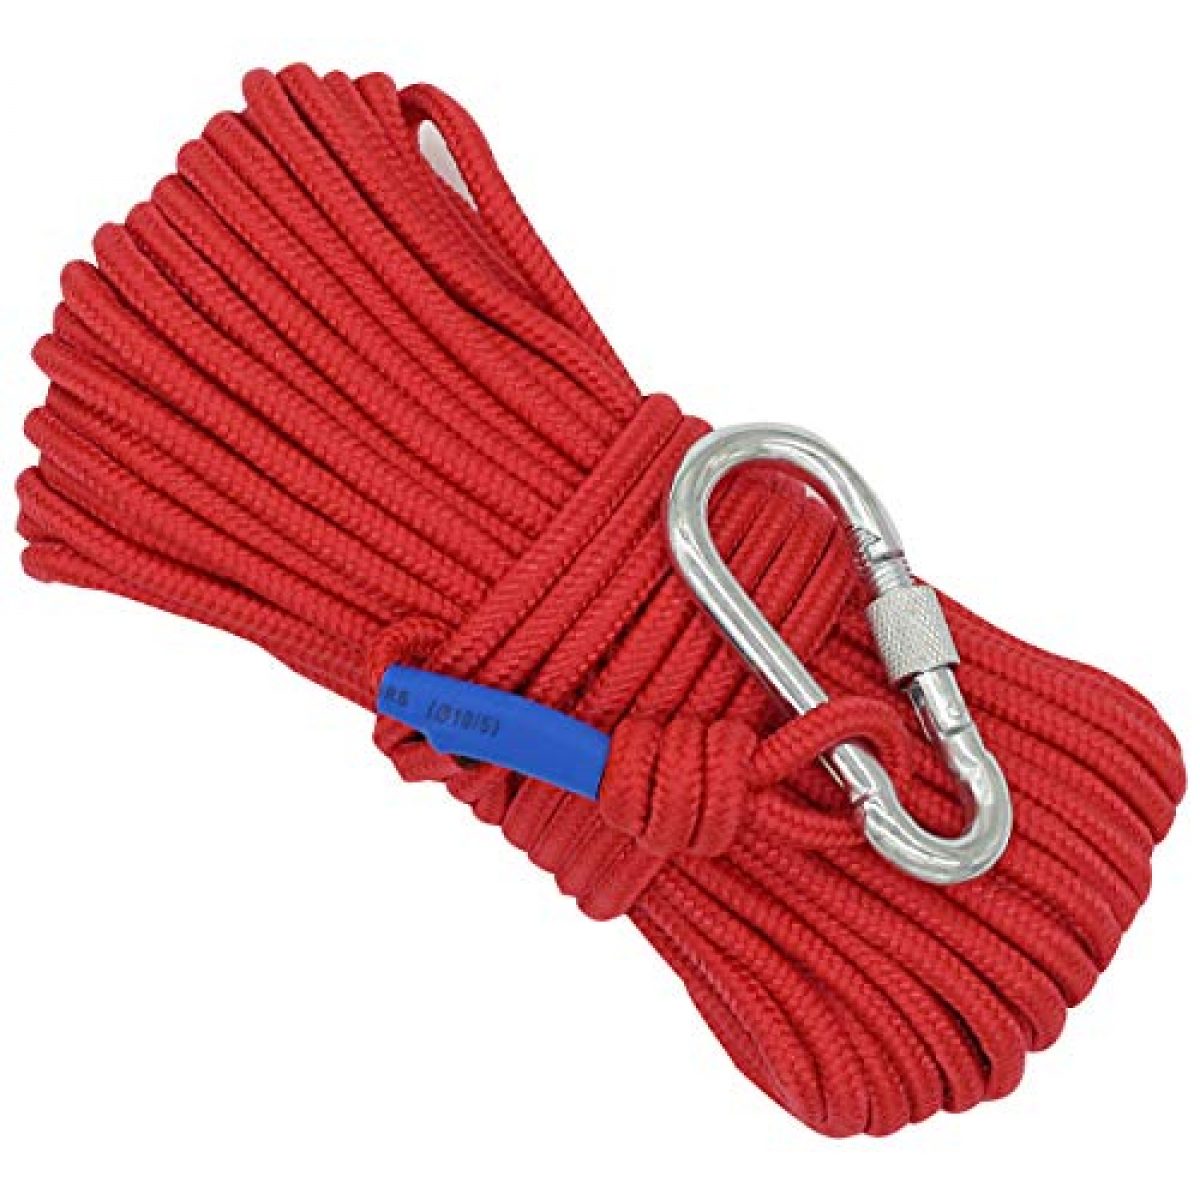 HOTUEEN Rock Climbing Rope Magnet Fishing Rope with Carabiner Nylon Rope Safe Durable All Purpose High Strength Braid Rope fit for Indoor Outdoor Outdoor 5-15M